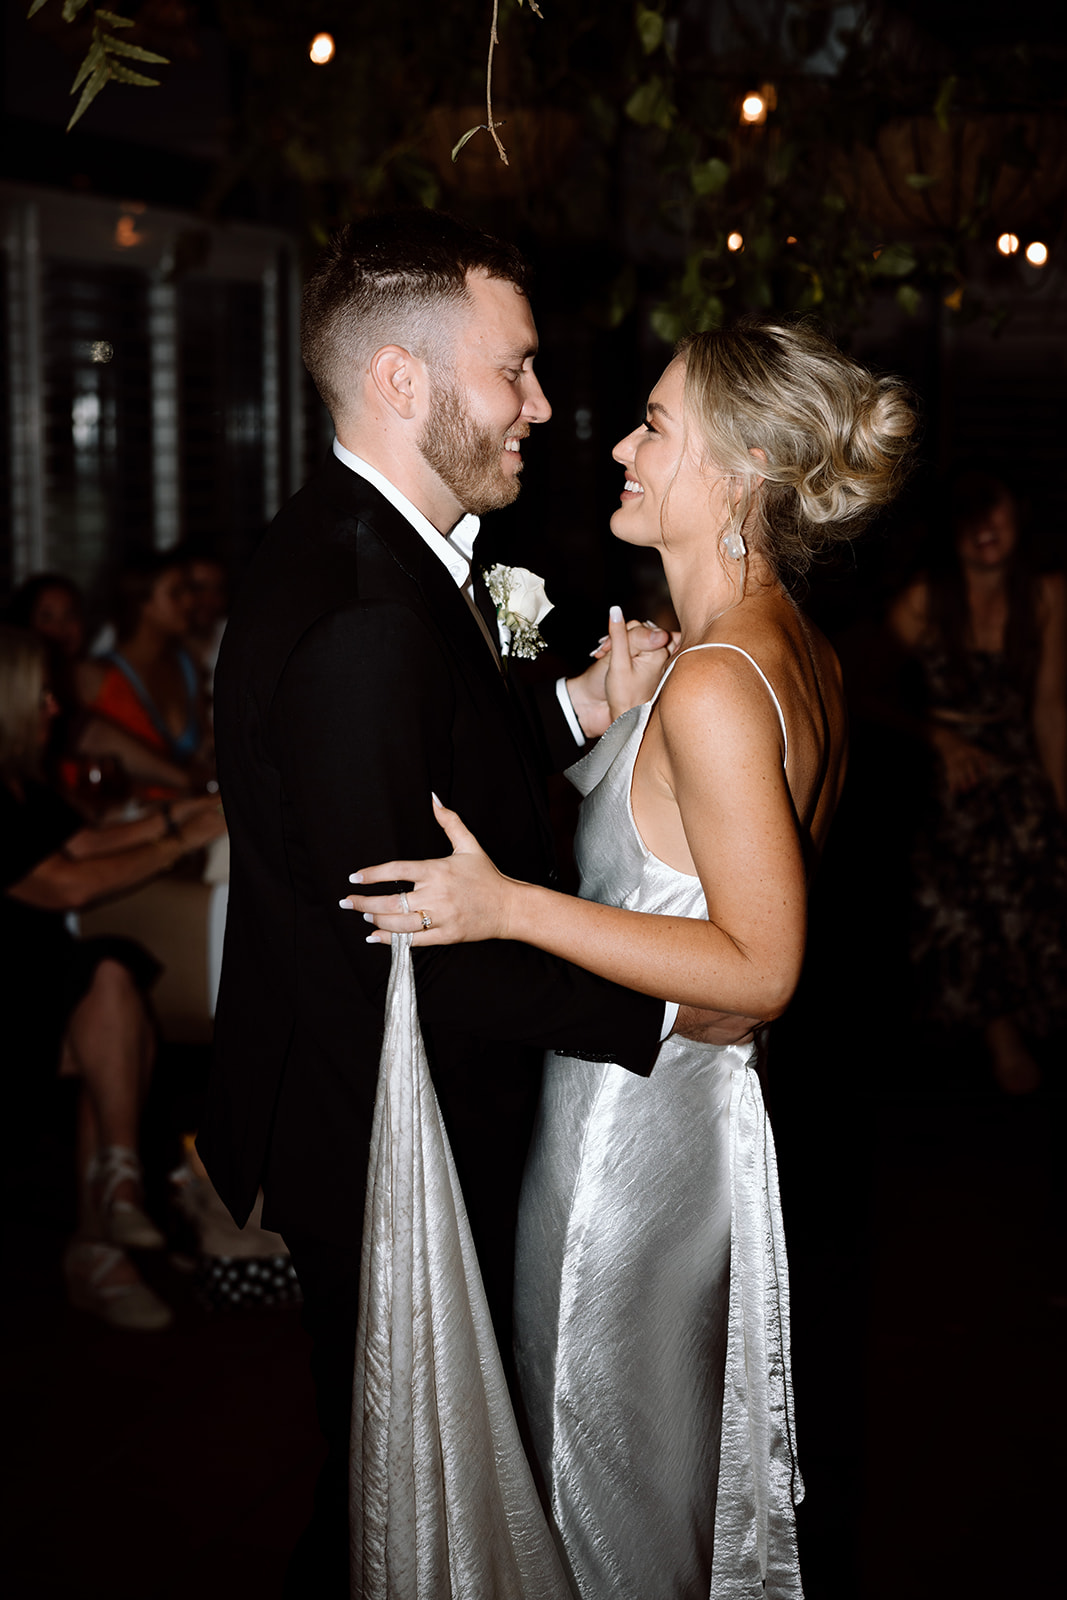 Bride and groom first dance as the couple at the wedding reception in The Fernery Mosman